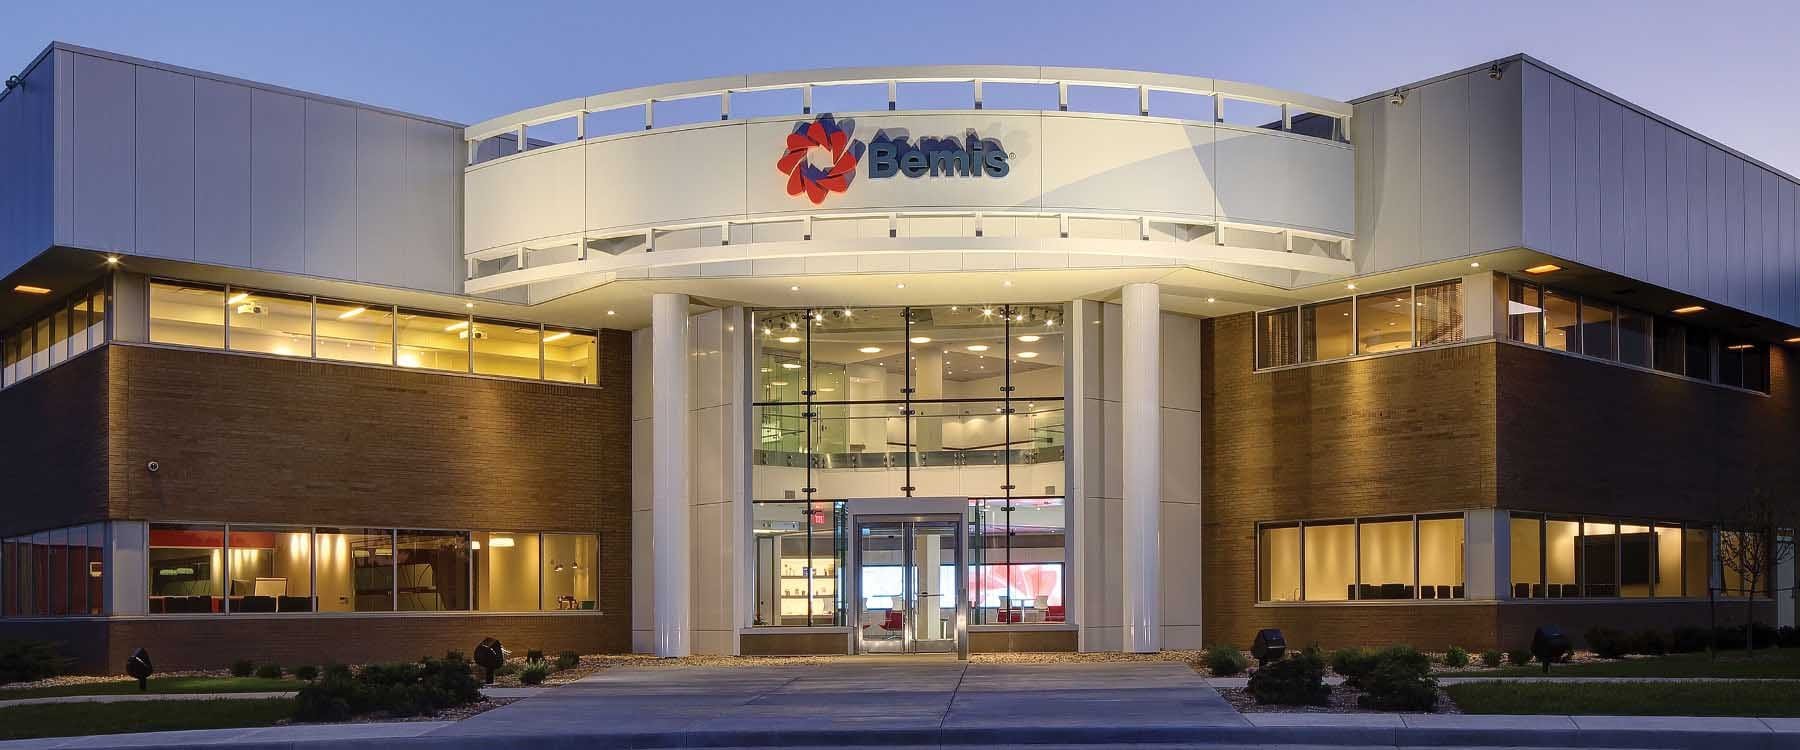 The adaptive re-use project for Bemis Corporation in Neenah, Wisconsin, converted a warehouse and manufacturing facility into a real-time client-centered research & development (R&D) center for sales enablement